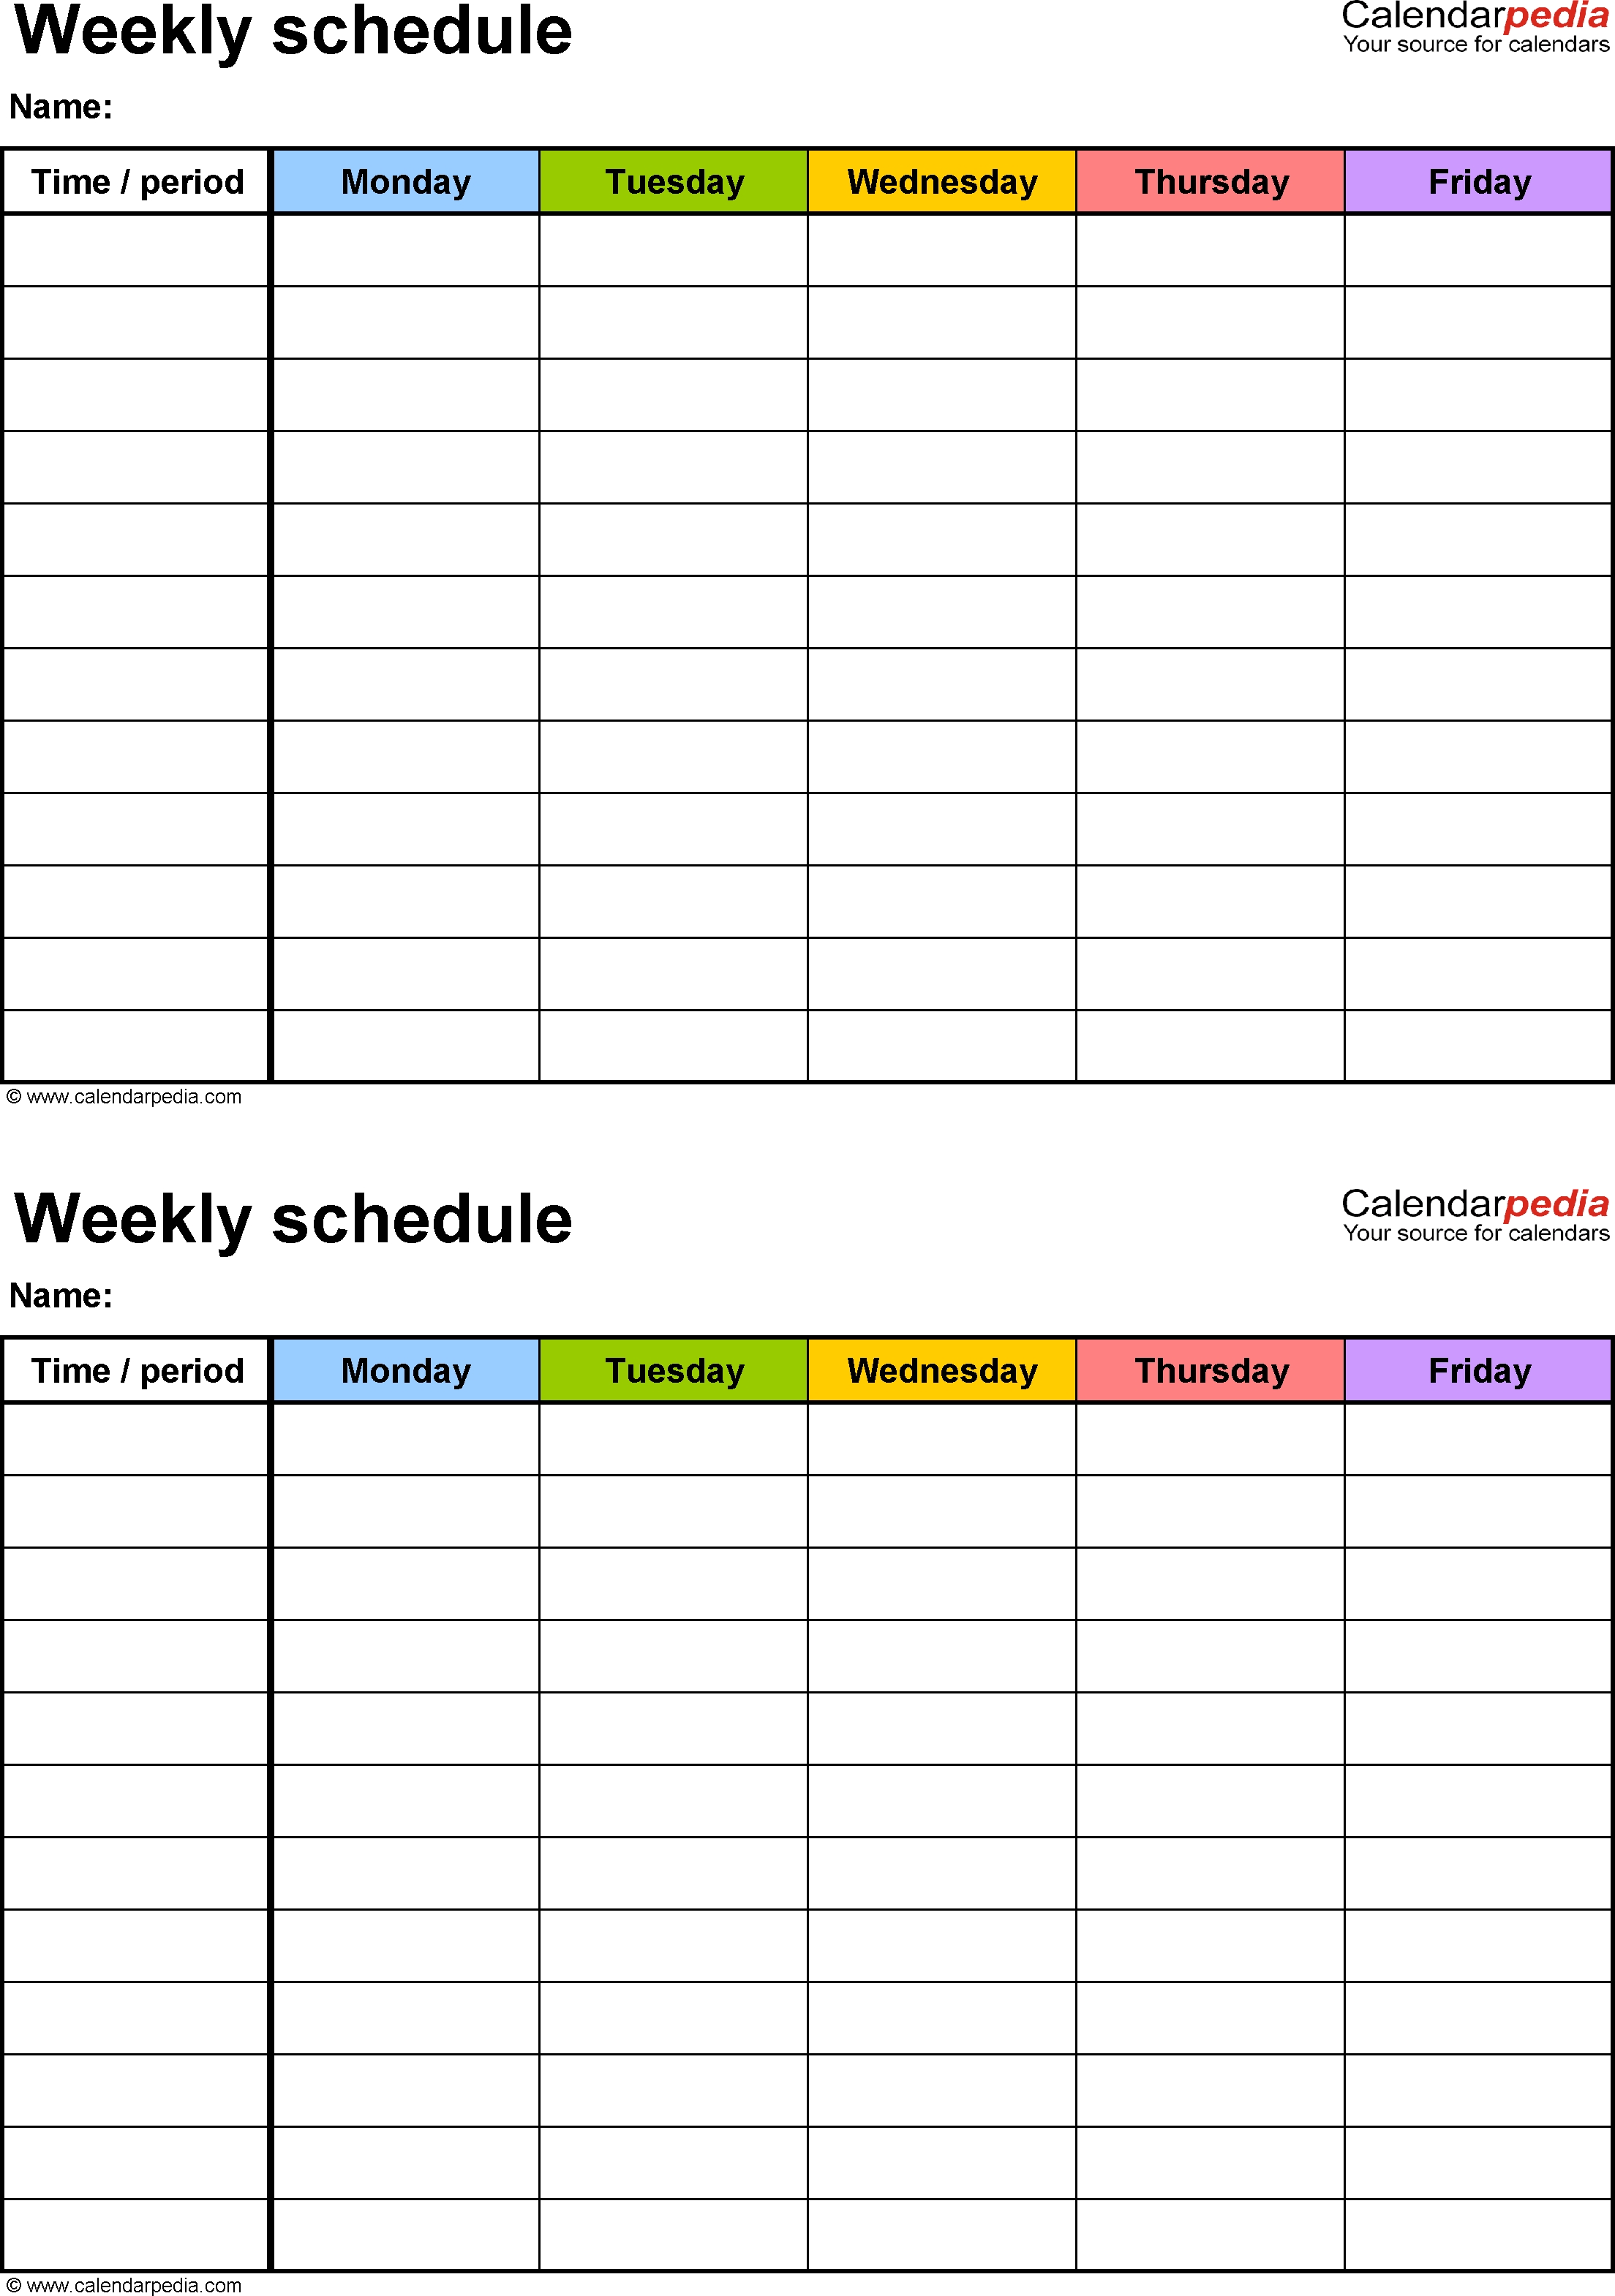 Free Weekly Schedule Templates For Excel - 18 Templates throughout Free One Month Schedule Templates